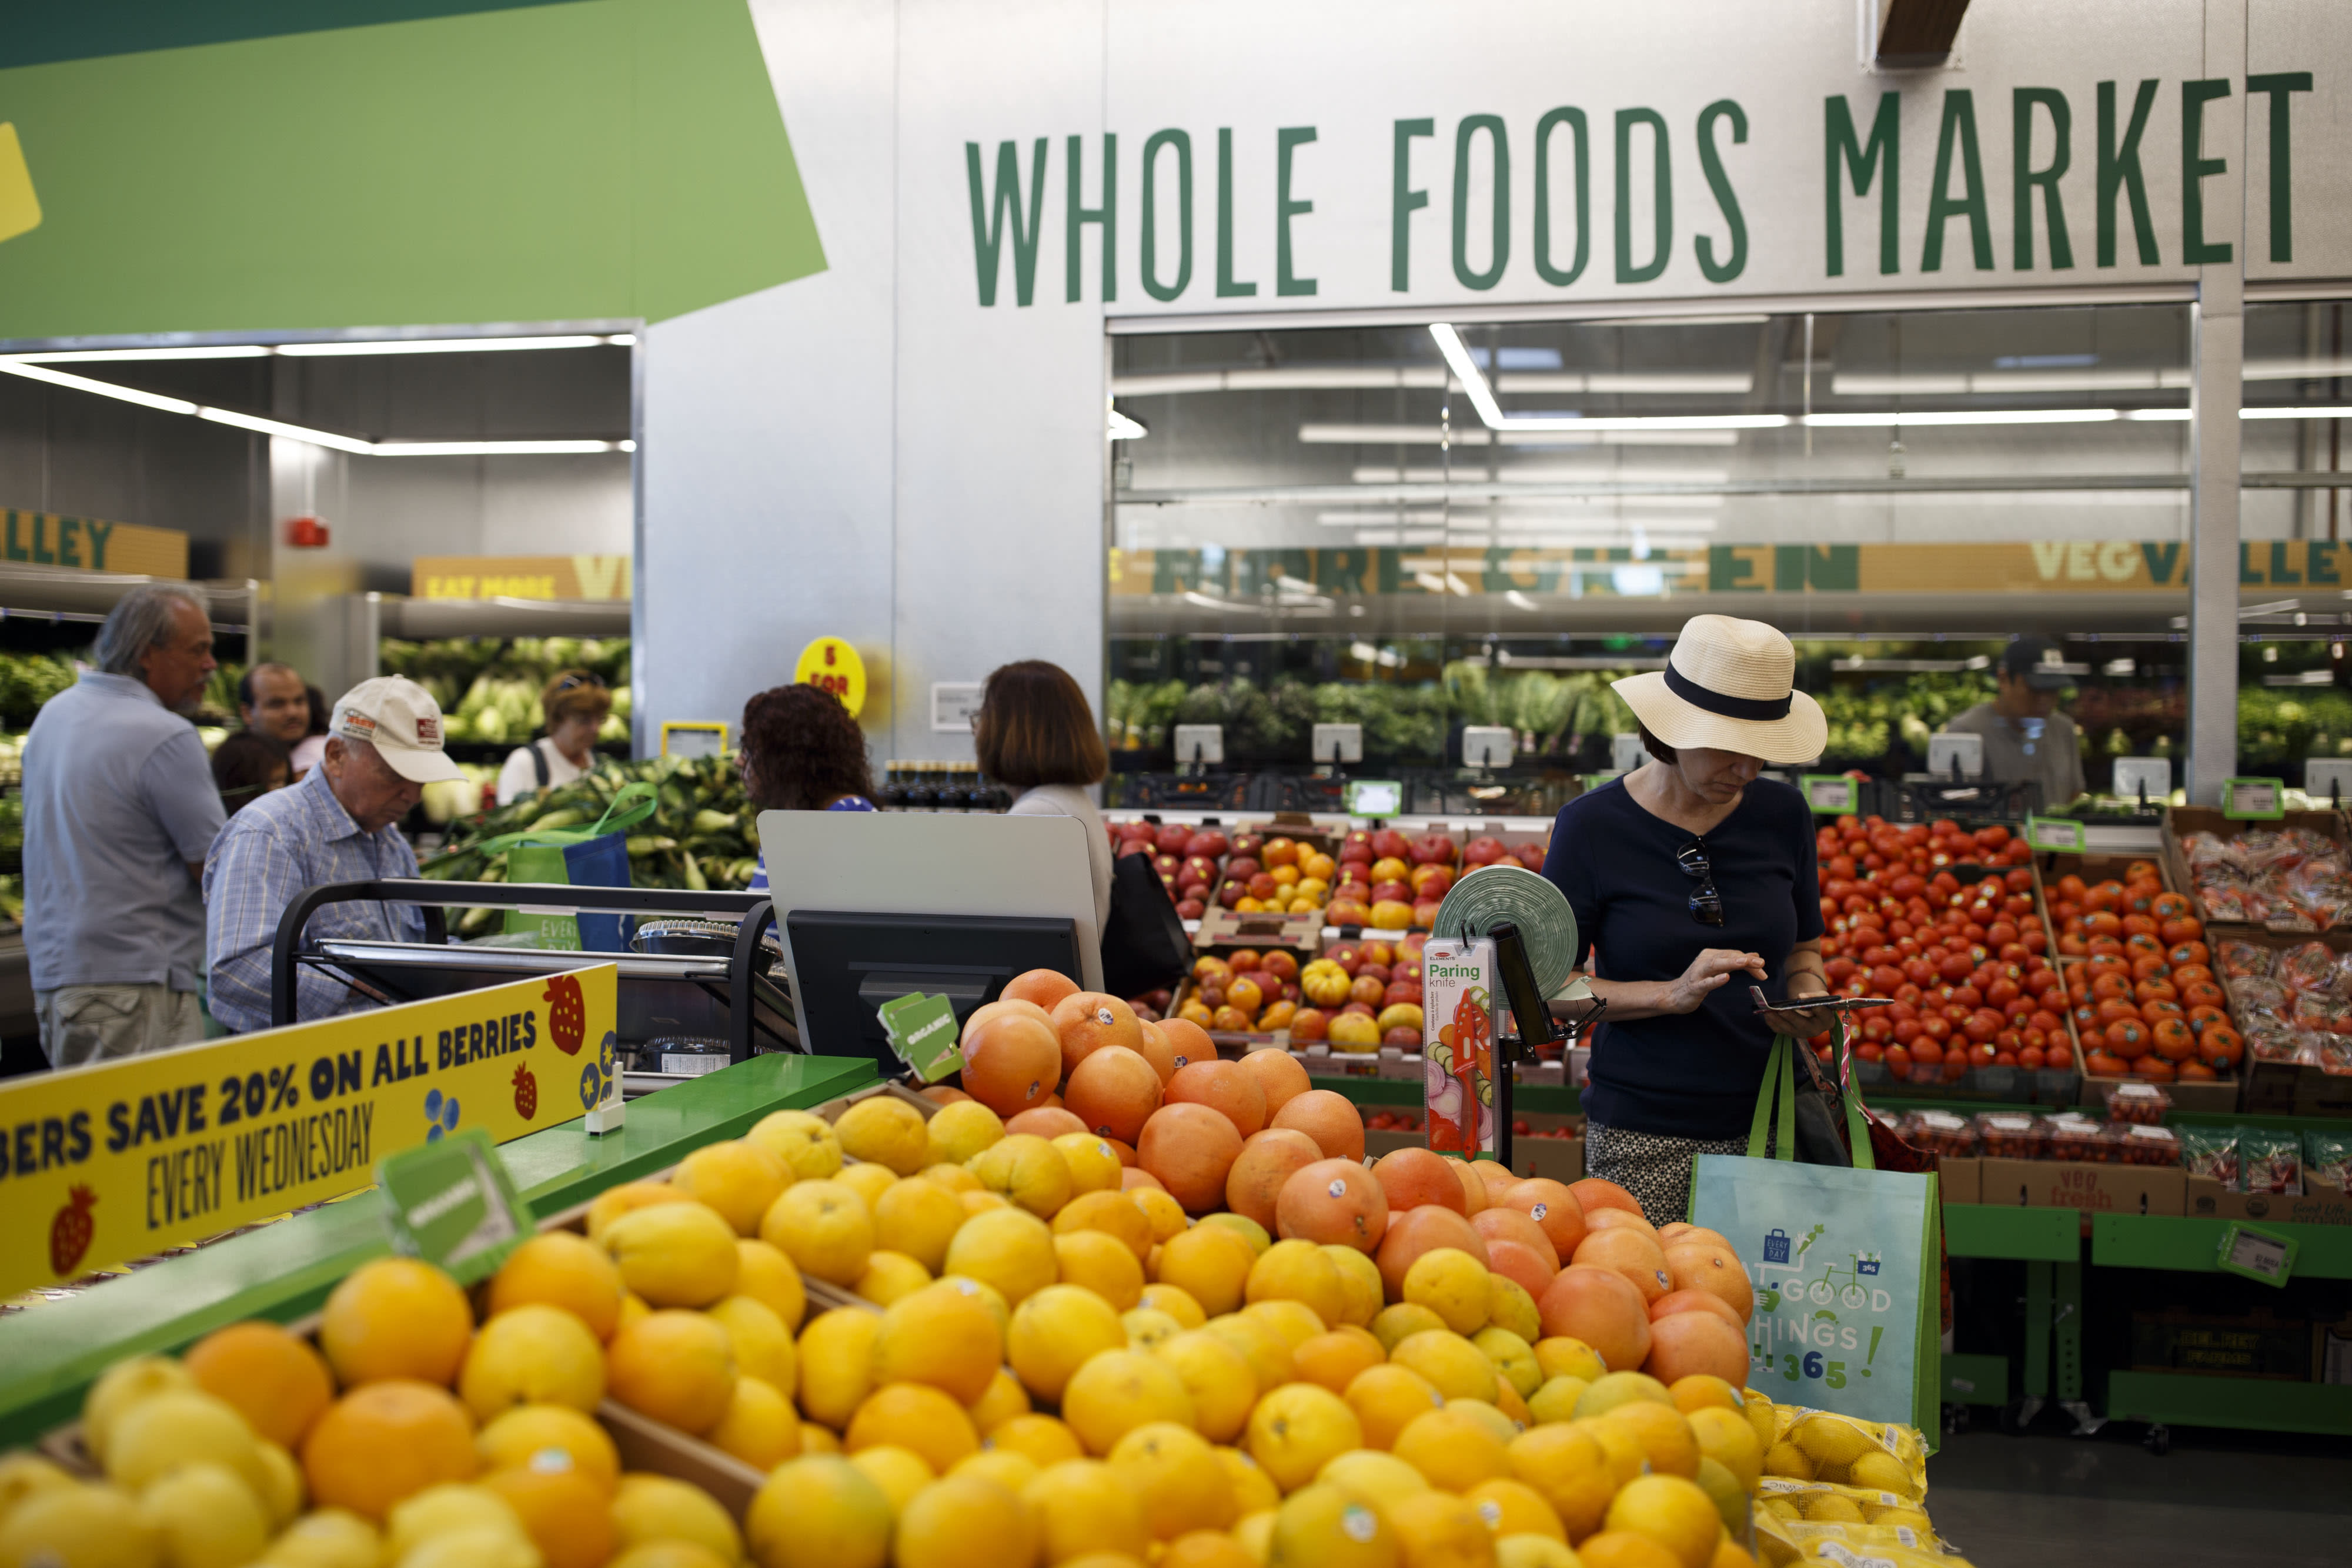 Amazon cutting prices at Whole Foods in last 6 months: Morgan Stanley